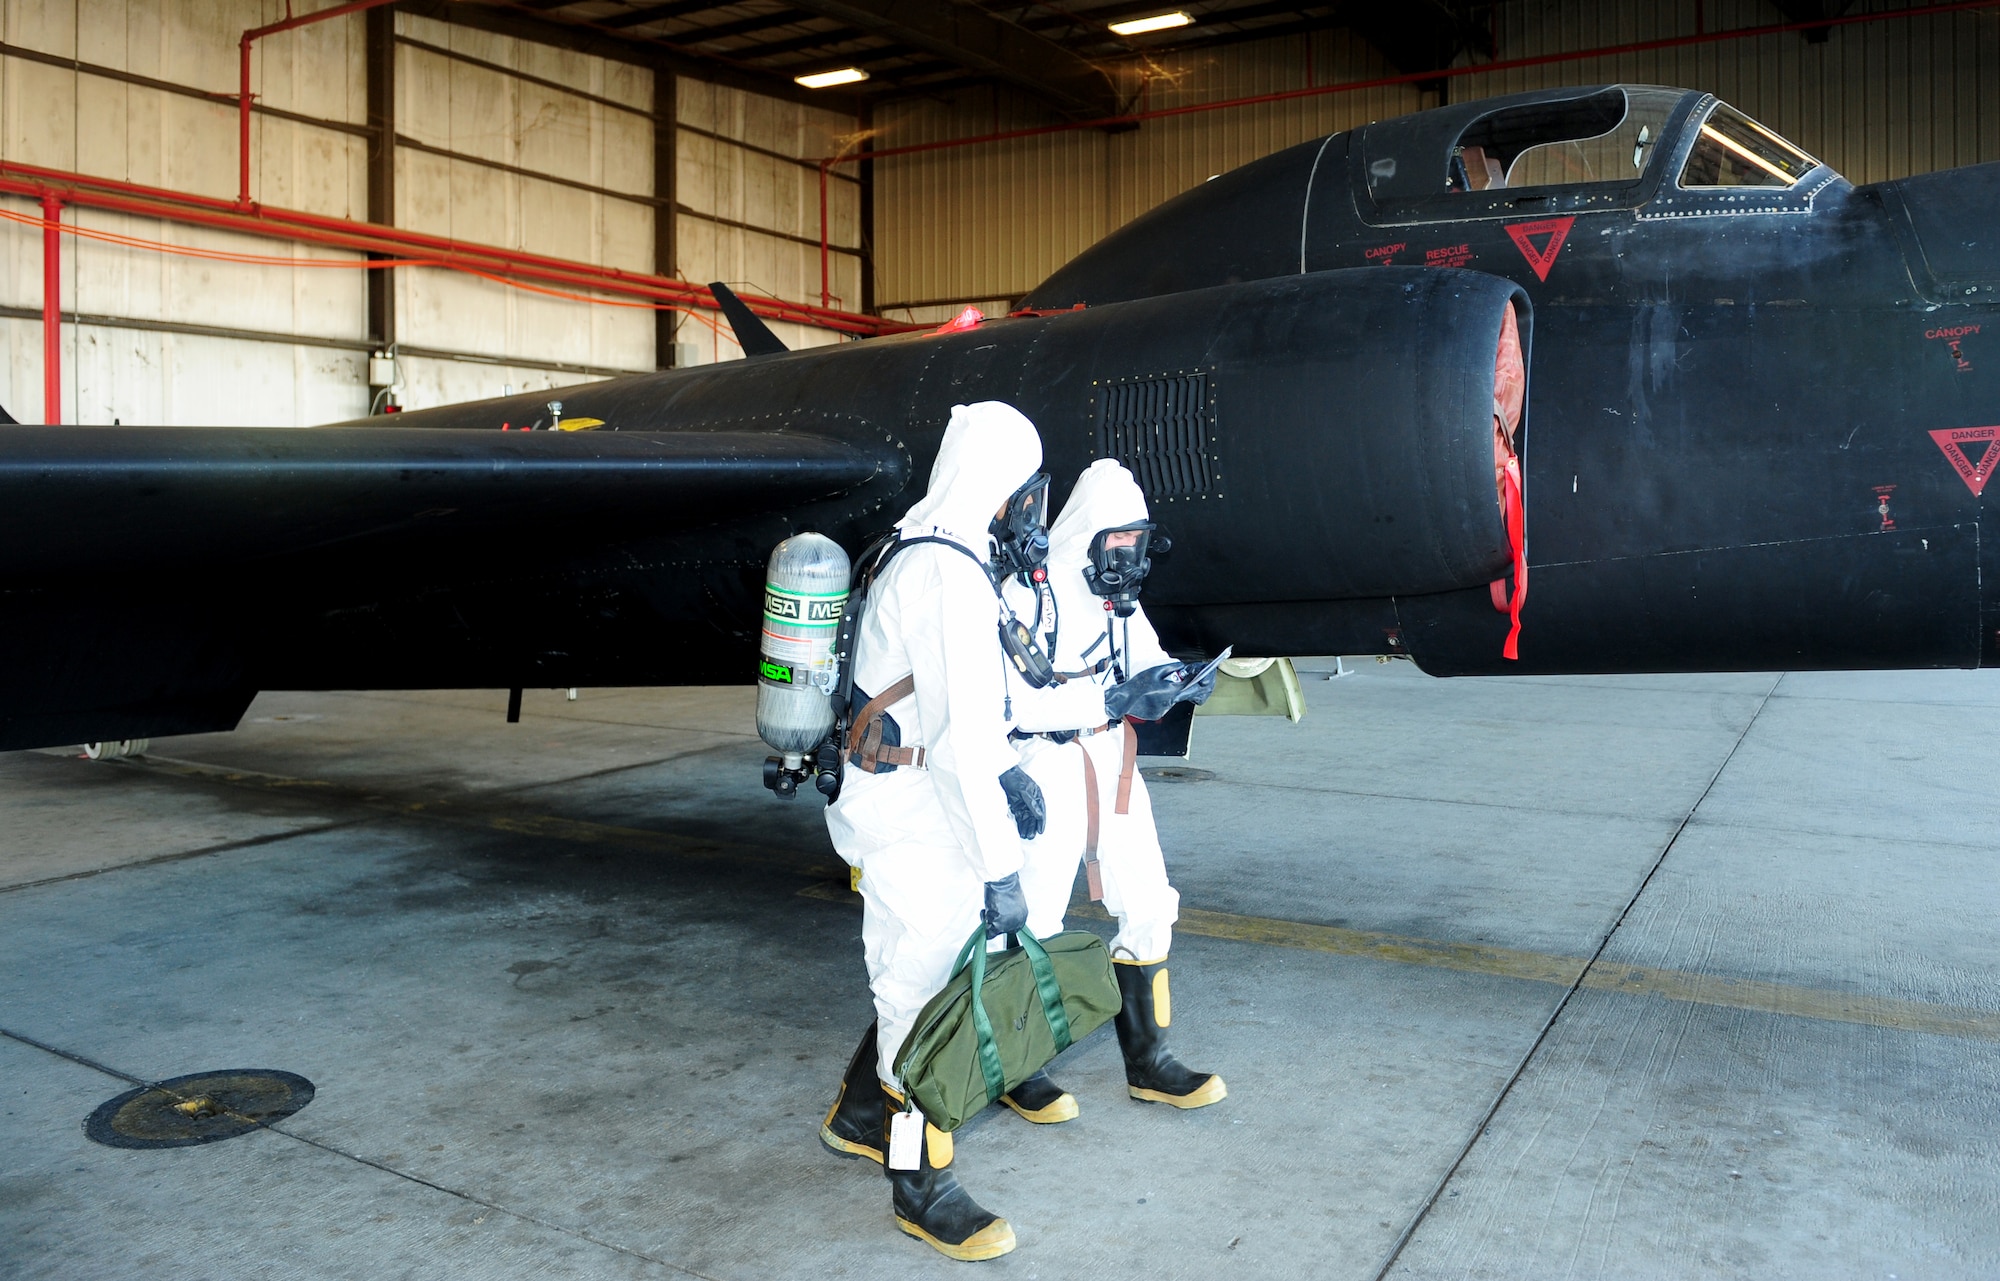 Staff Sgt. Brian Hart (front), 9th Maintenance Squadron aircraft fuels systems technician, performs inspections on a U-2 Dragon Lady with Senior Airman James Everson, 9th Maintenance Squadron aircraft fuels systems technician, Oct. 11, 2013, at Beale Air Force Base, Calif. The hazardous materials suits protect the Airmen from exposure to hydrazine. (U.S. Air Force photo by Airman 1st Class Bobby Cummings/Released)